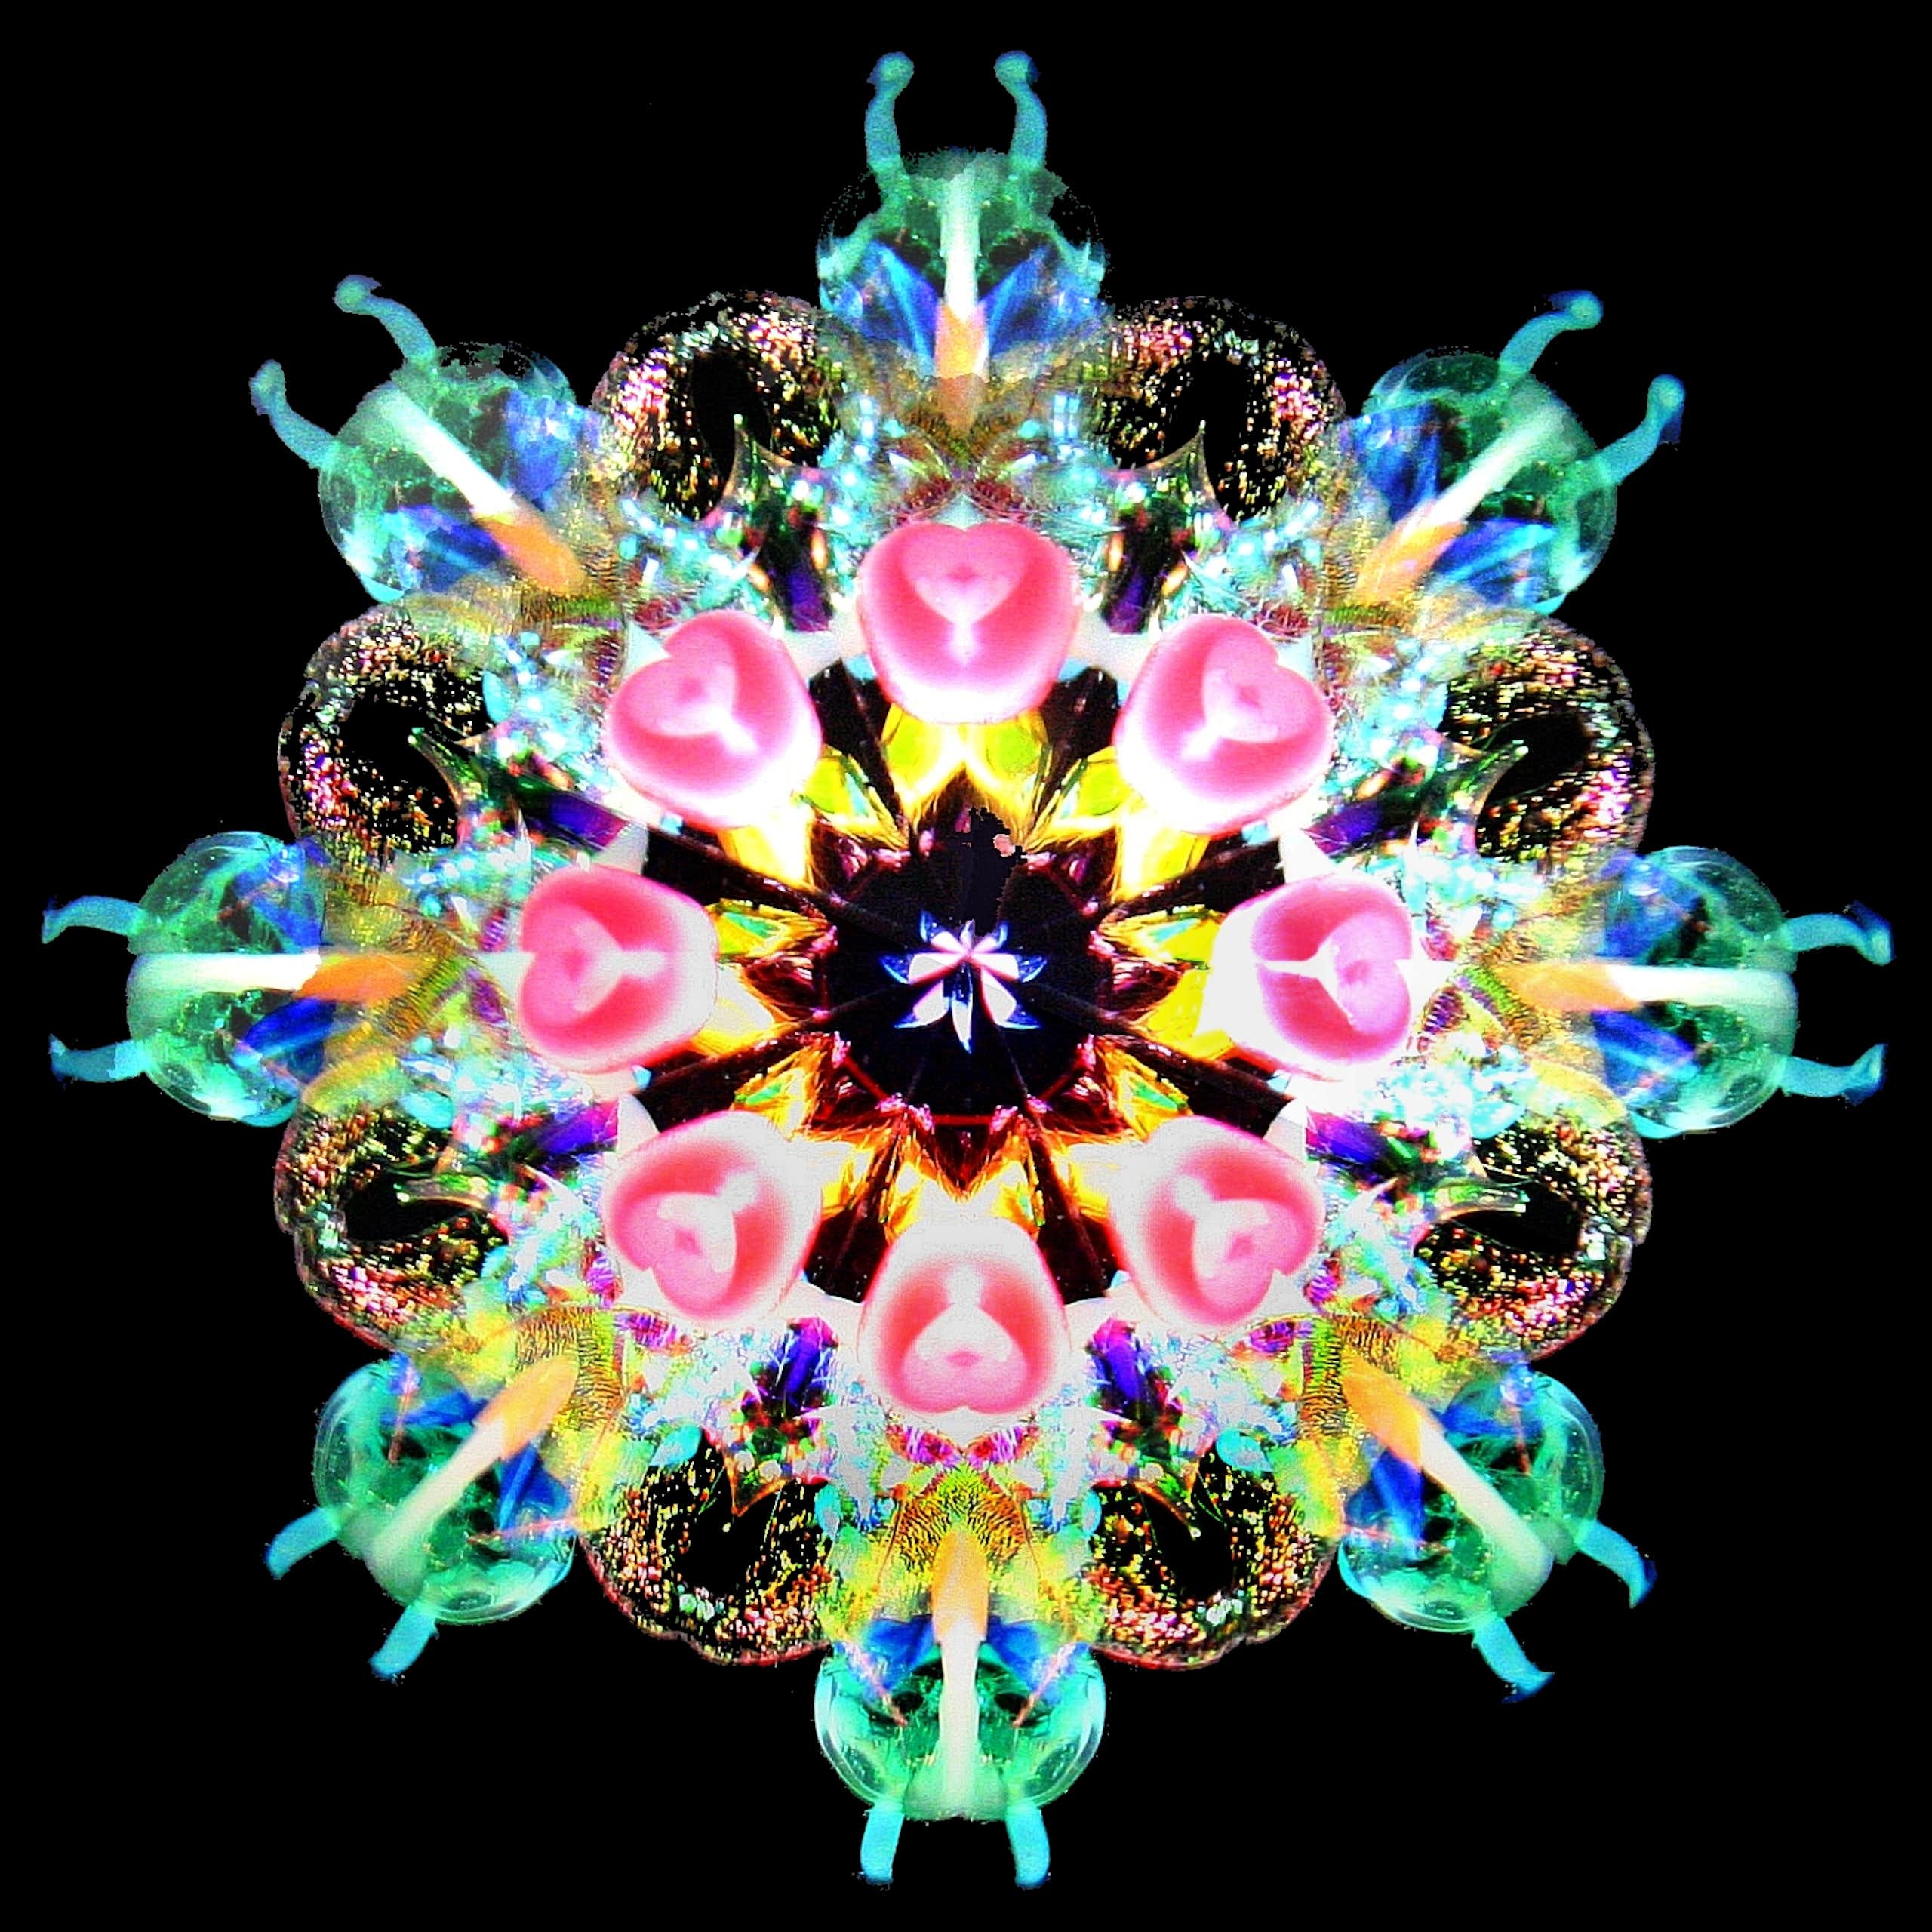 view into a kaleidoscope showing a flower-petal-like arrangement of eight segments, each showing multicolored shapes